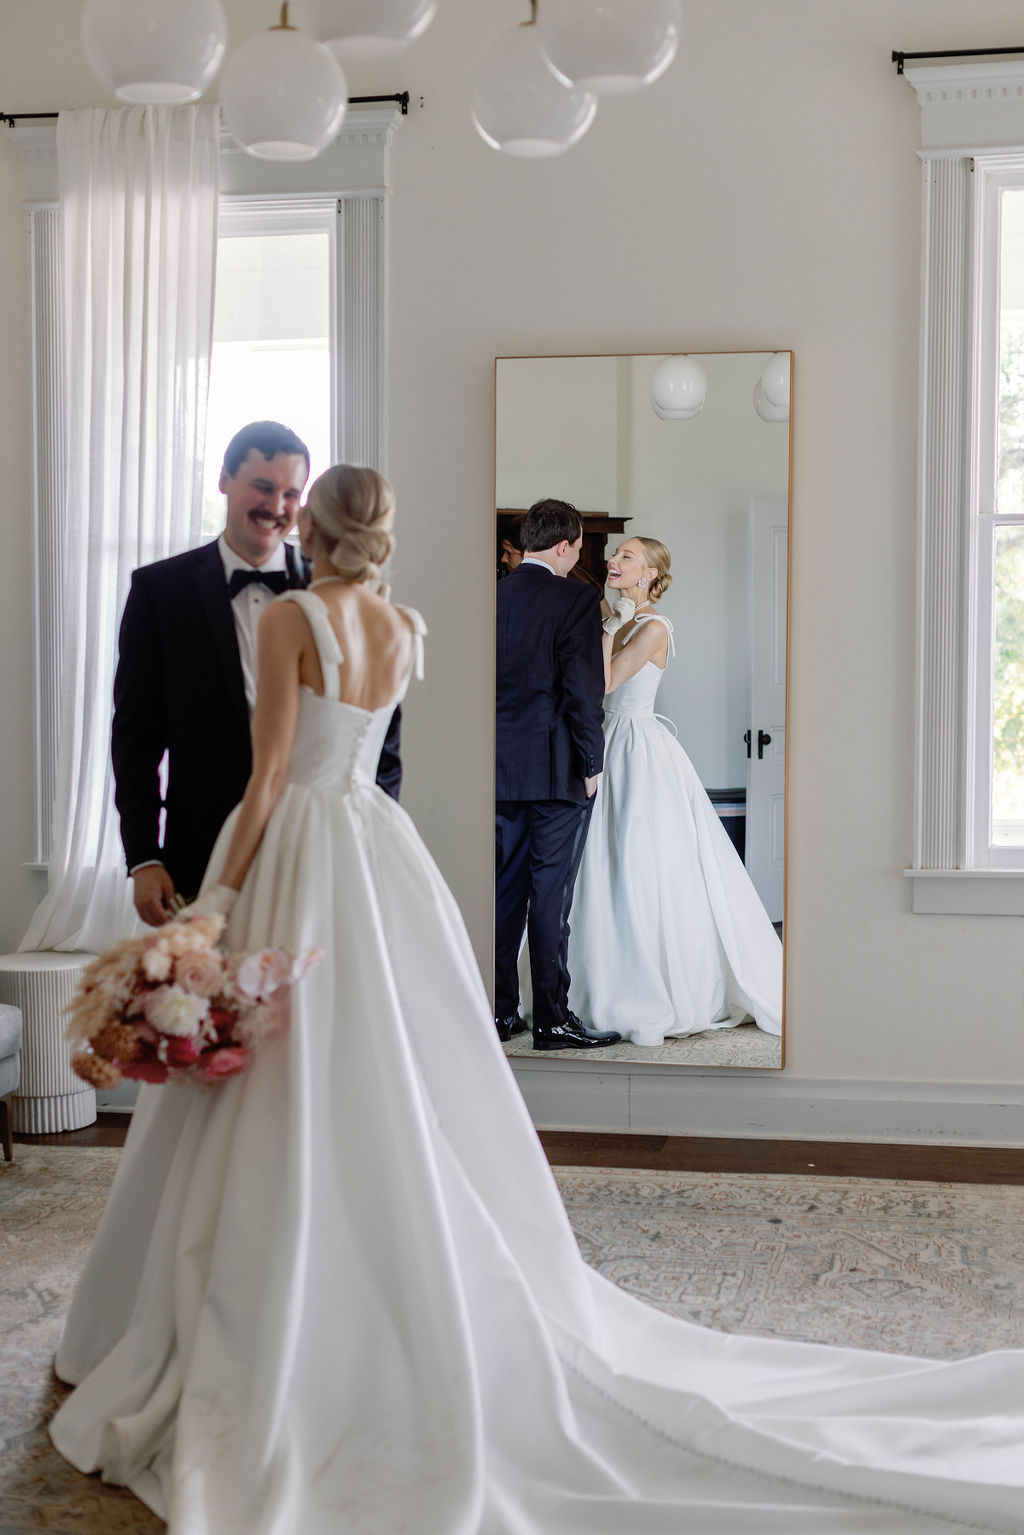 Bride and groom steal away and enjoy a moment alone in front of the mirror at the Grand Lady wedding venue in Austin Texas. | Photo by Sarah Block Photography